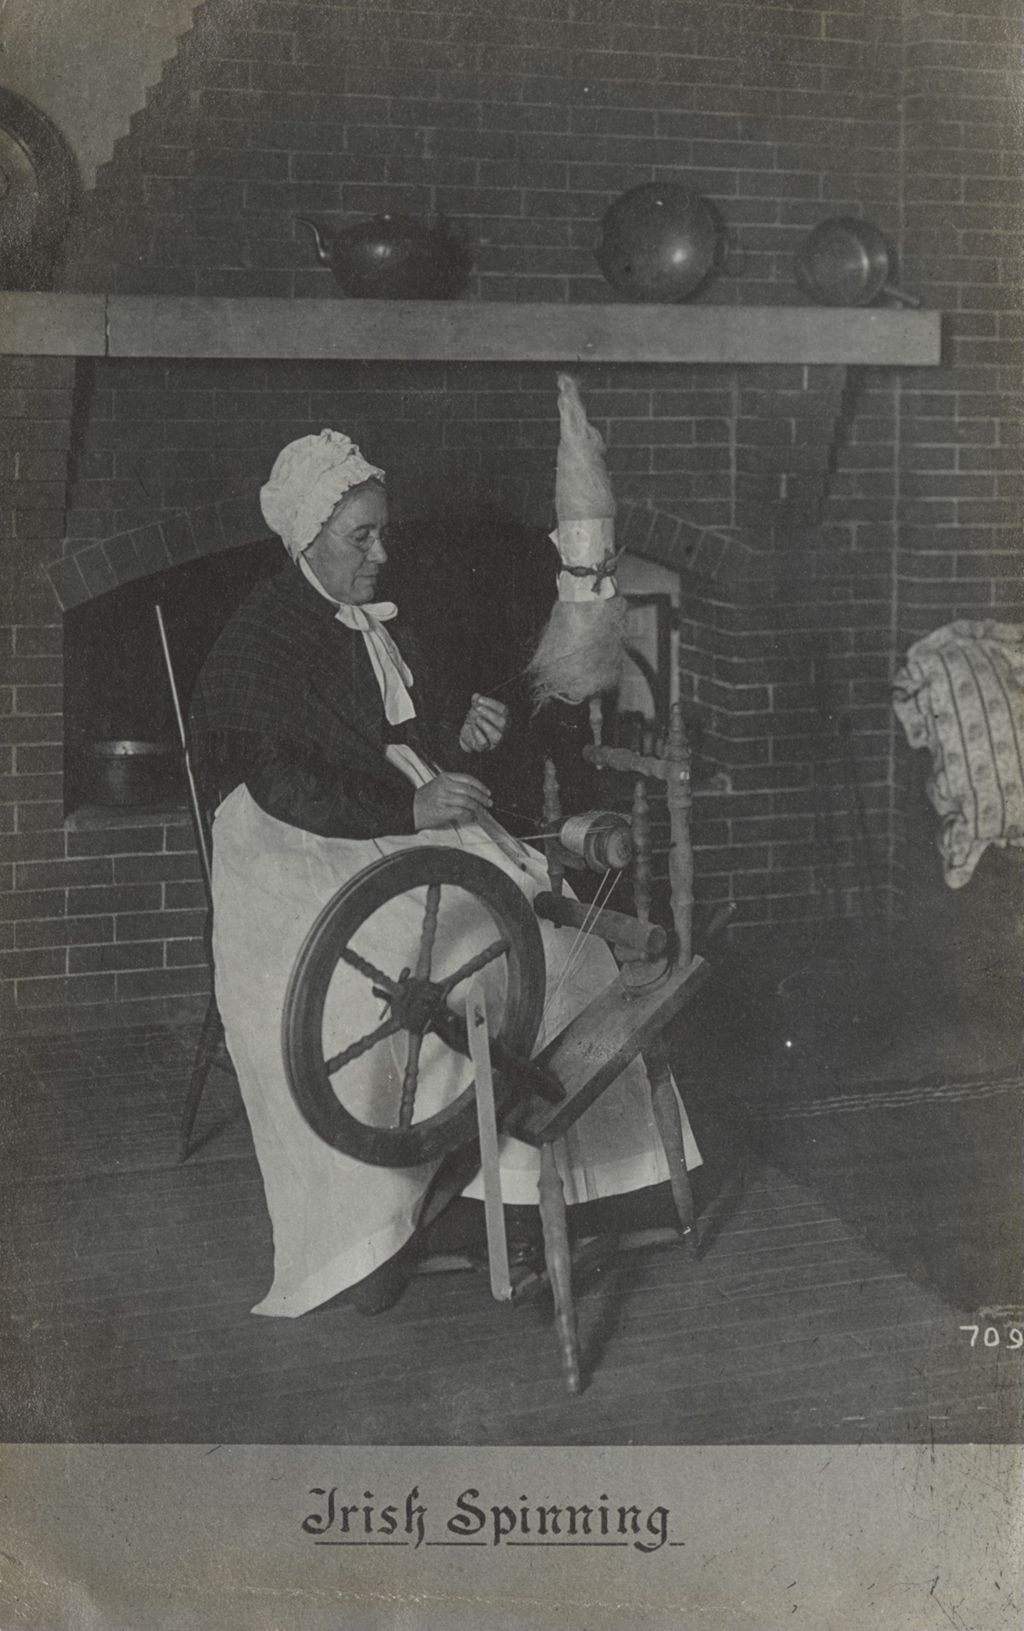 Miniature of Postcard of woman demonstrating "Irish Spinning" at Hull-House Labor Museum